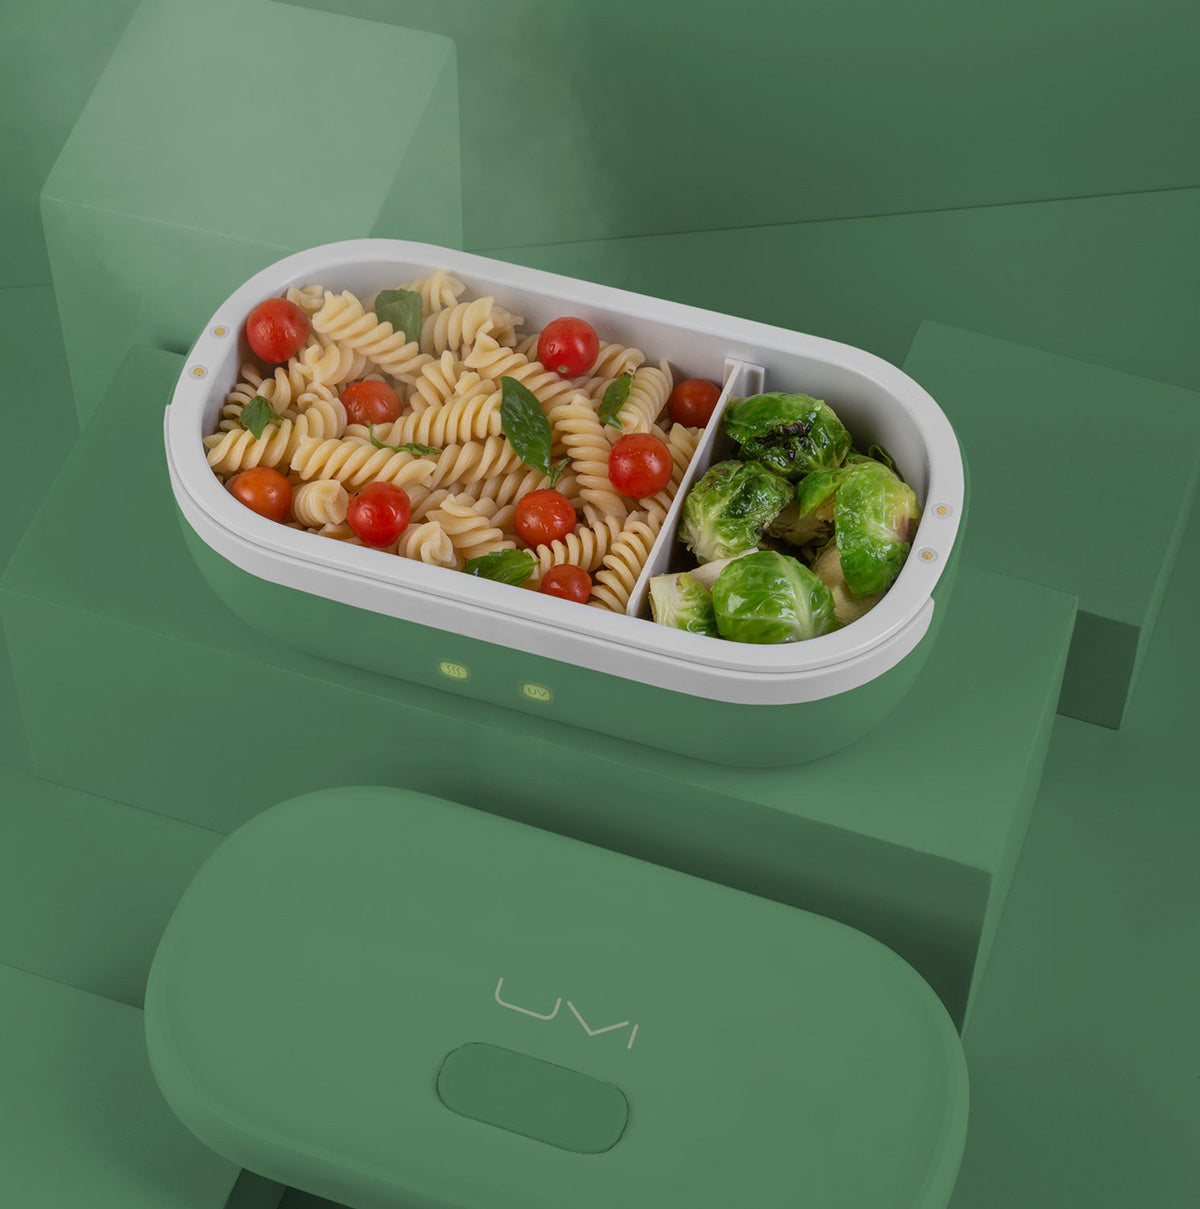 UVI - Self Heating & Cleaning Lunchbox with UV light